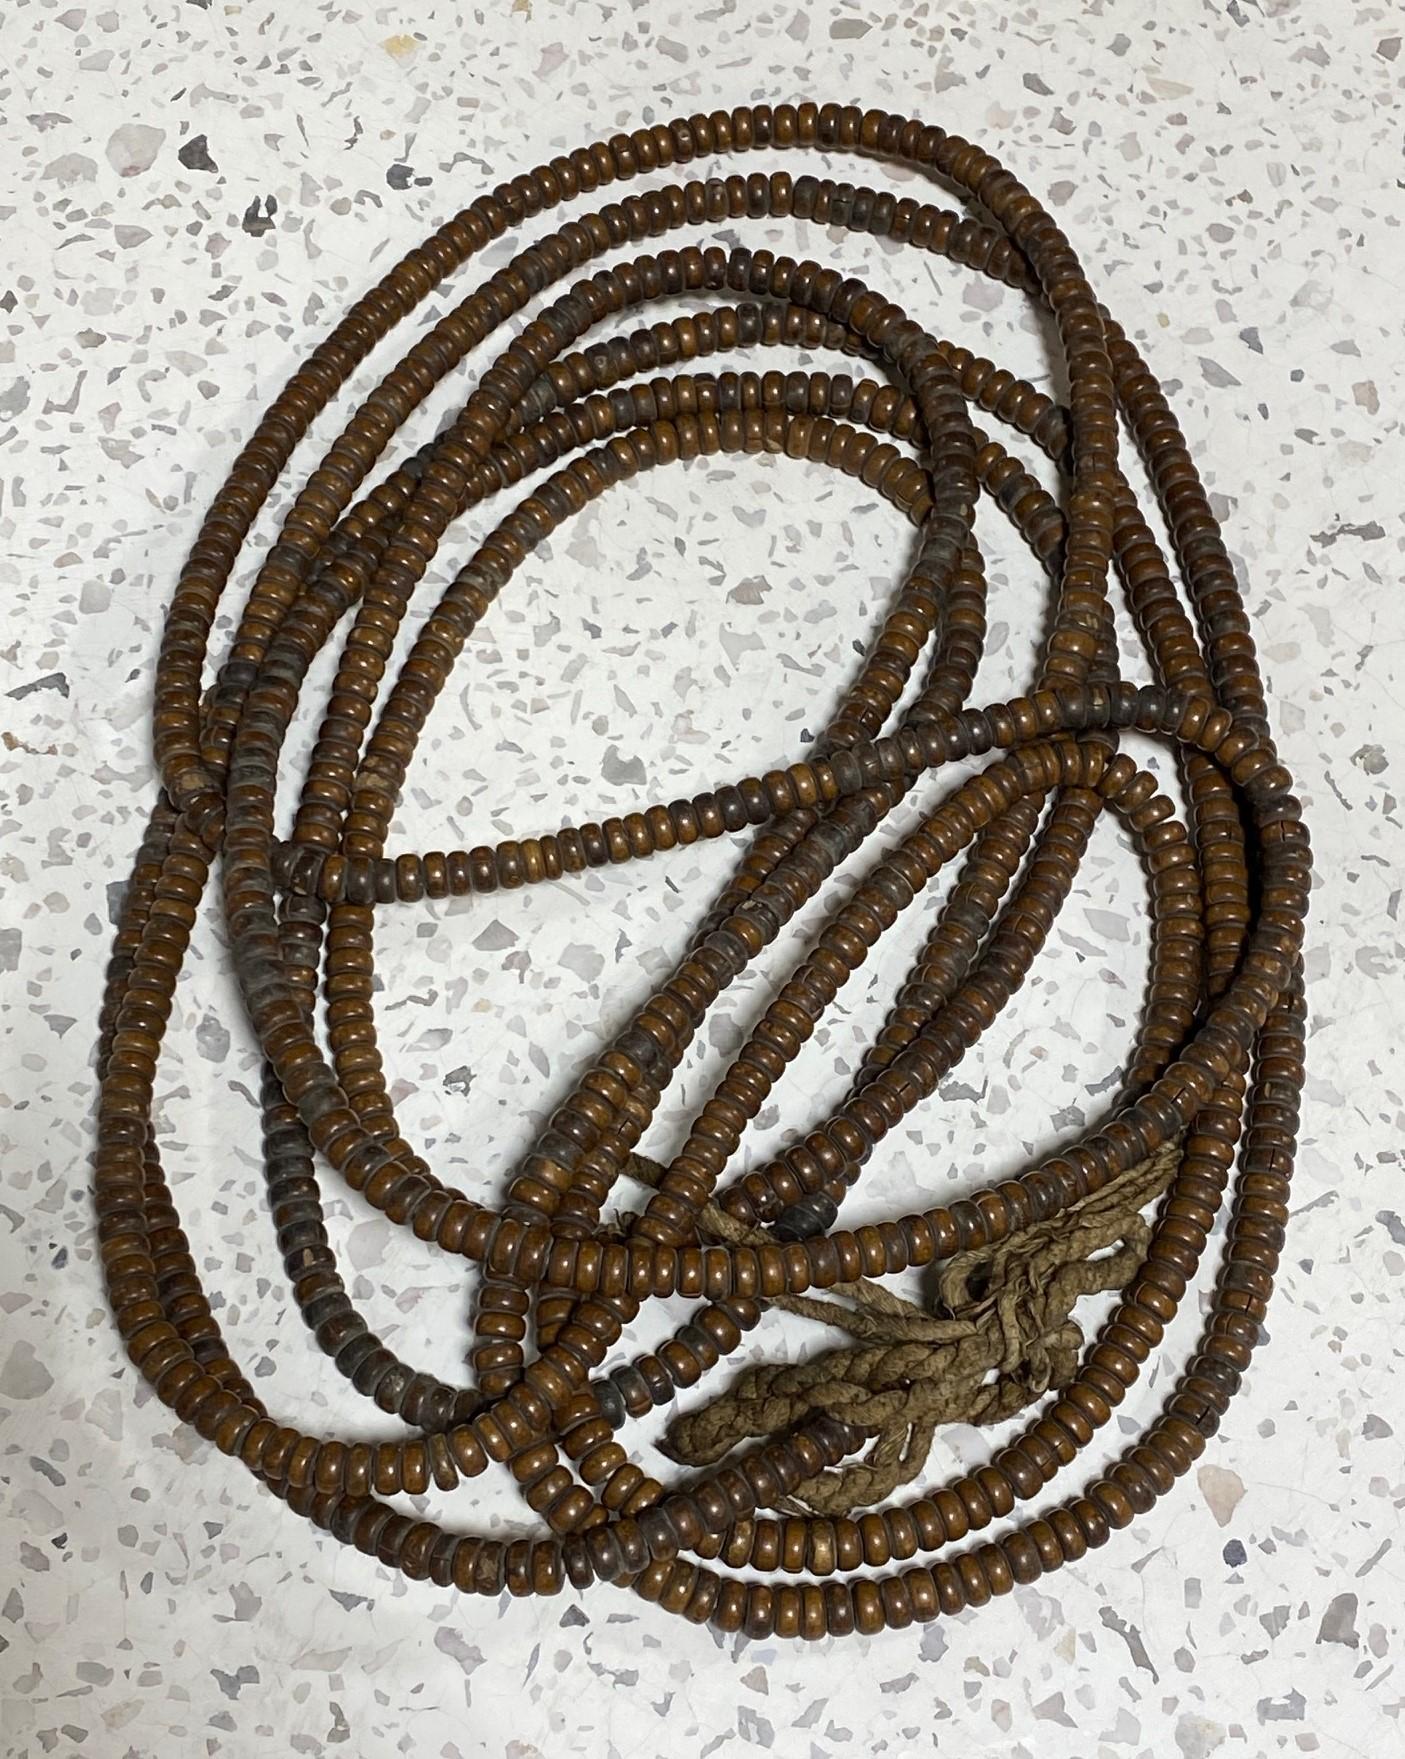 A truly magnificent and special work - this beautiful and exceptionally long string of Japanese hand-crafted natural wood (perhaps Rosewood) Buddhist Juzu mala beads. These rosary-type large prayer bead necklaces were used by Buddhist monks in